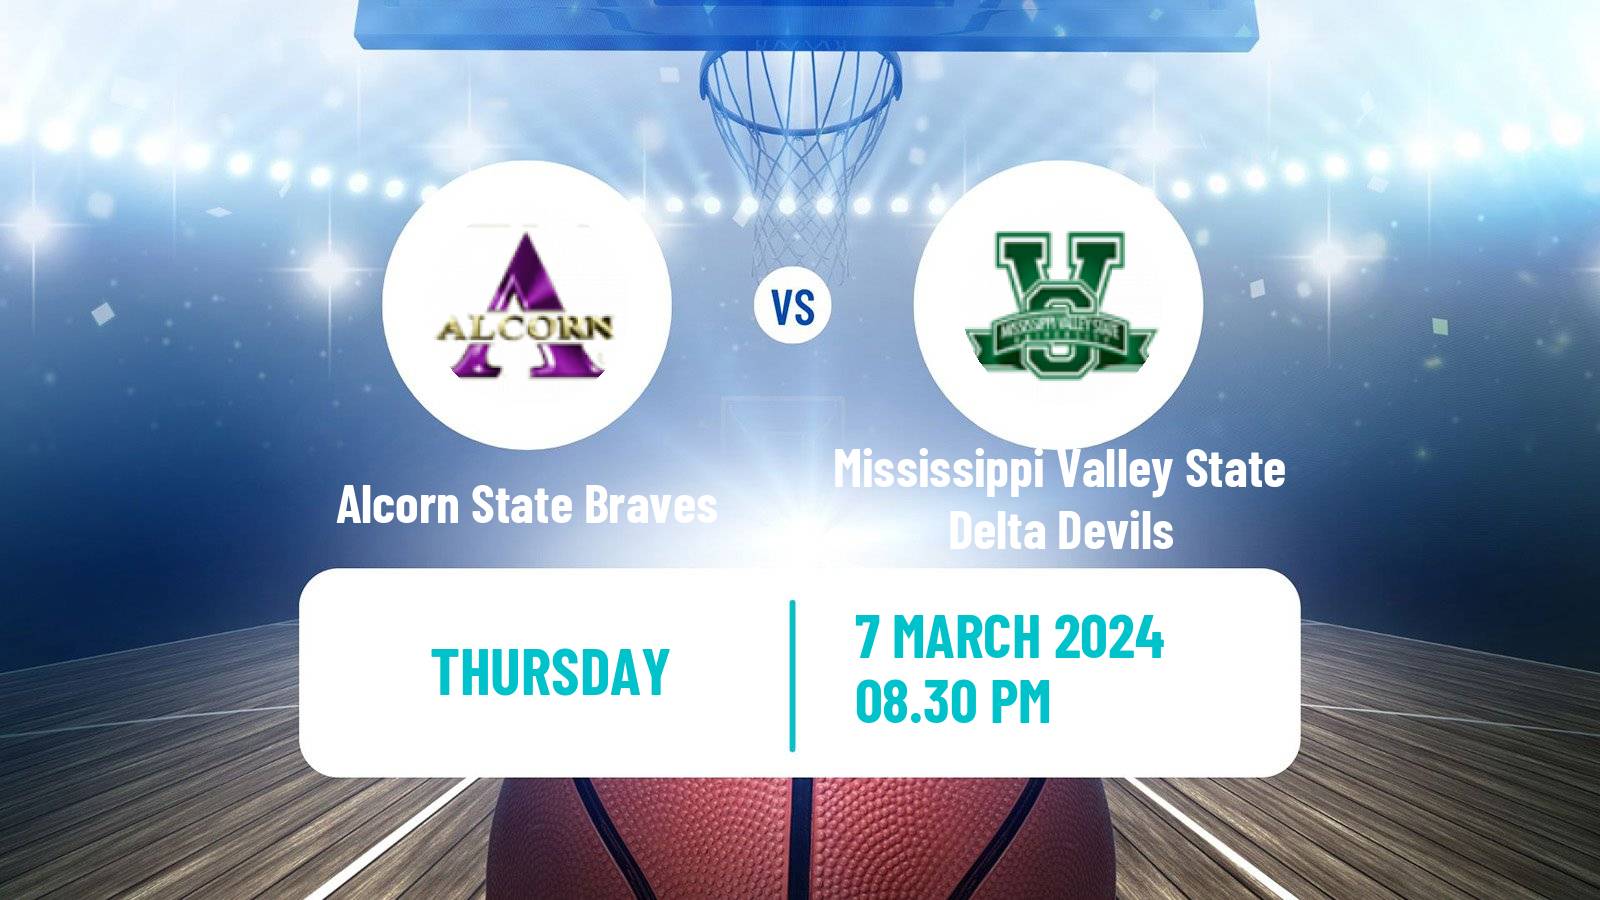 Basketball NCAA College Basketball Alcorn State Braves - Mississippi Valley State Delta Devils